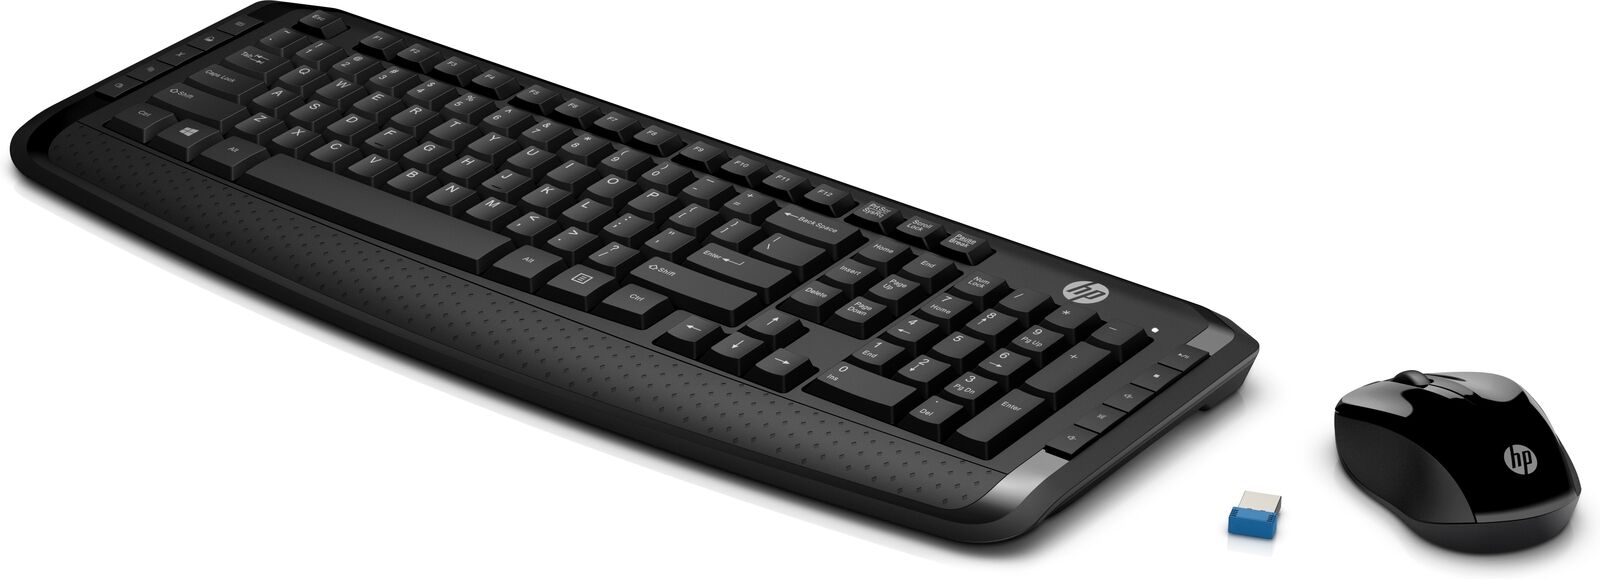 HP Wireless USB Full SIze Desktop Keyboard and Mouse 300 + Free Shipping $16.99